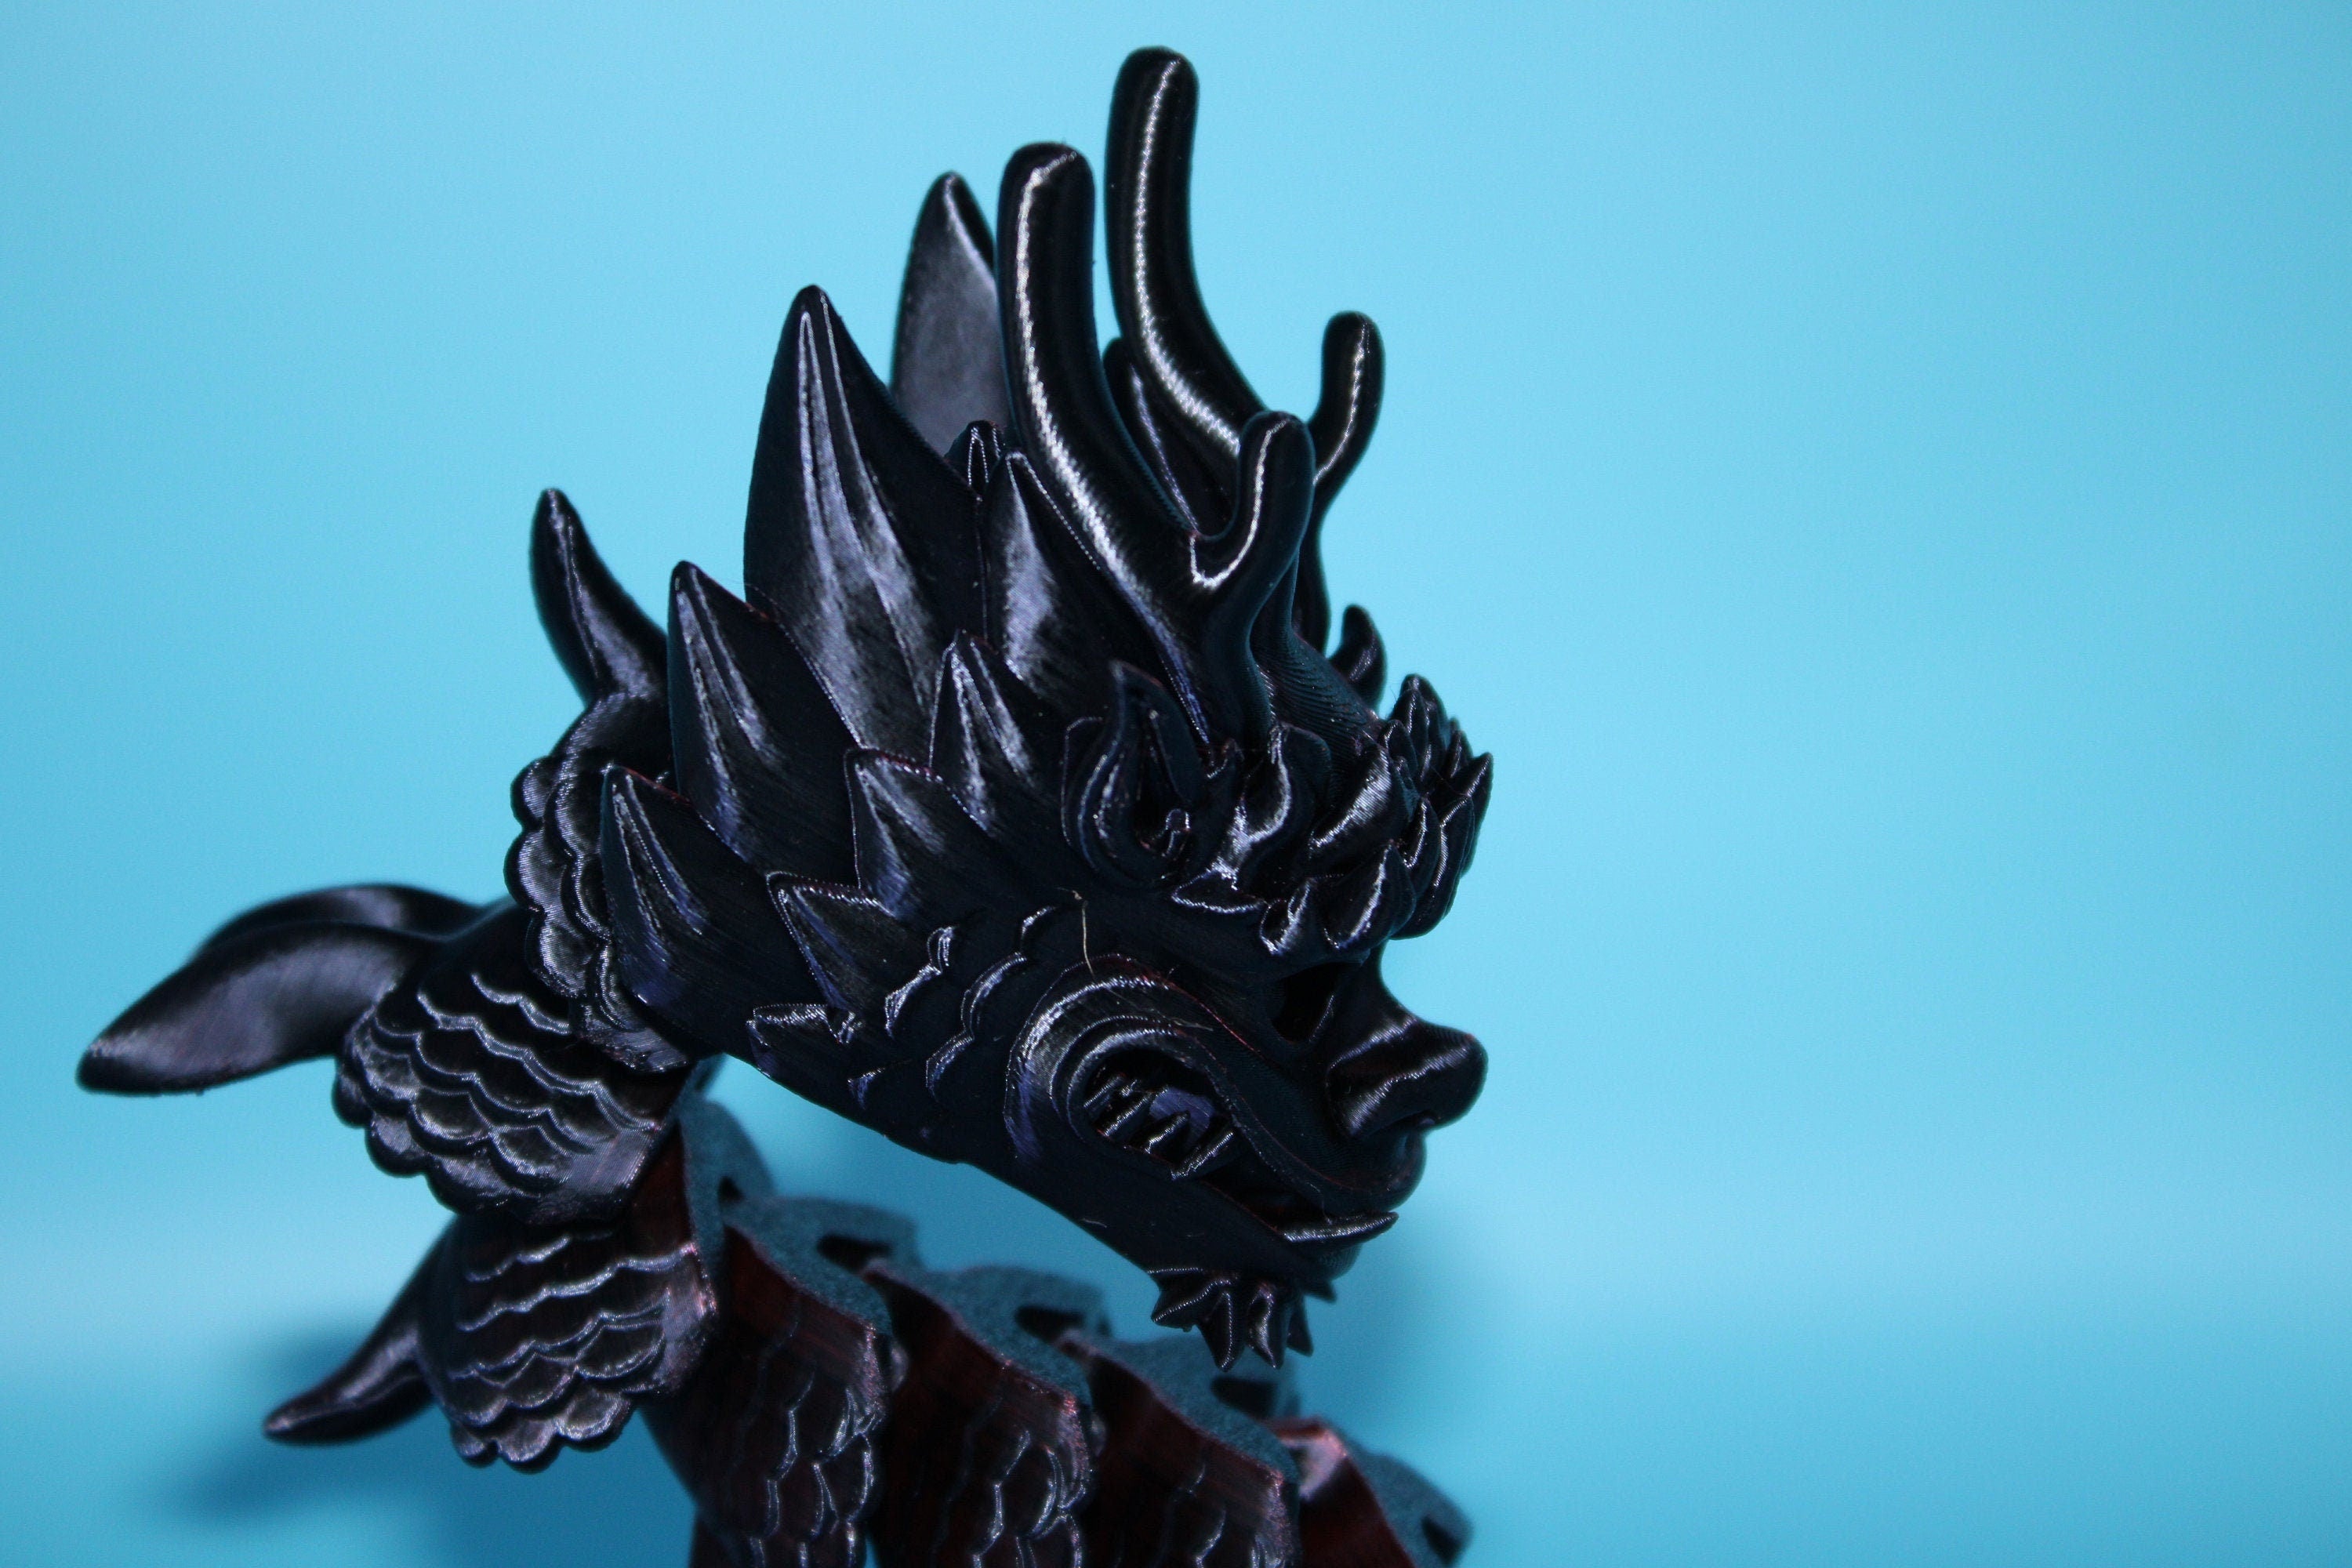 27 in. Multi Color Imperial Dragon | Fidget Toy Dragon 3D printed | Articulating Dragon | Flexi Toy | Stress Relief Gift